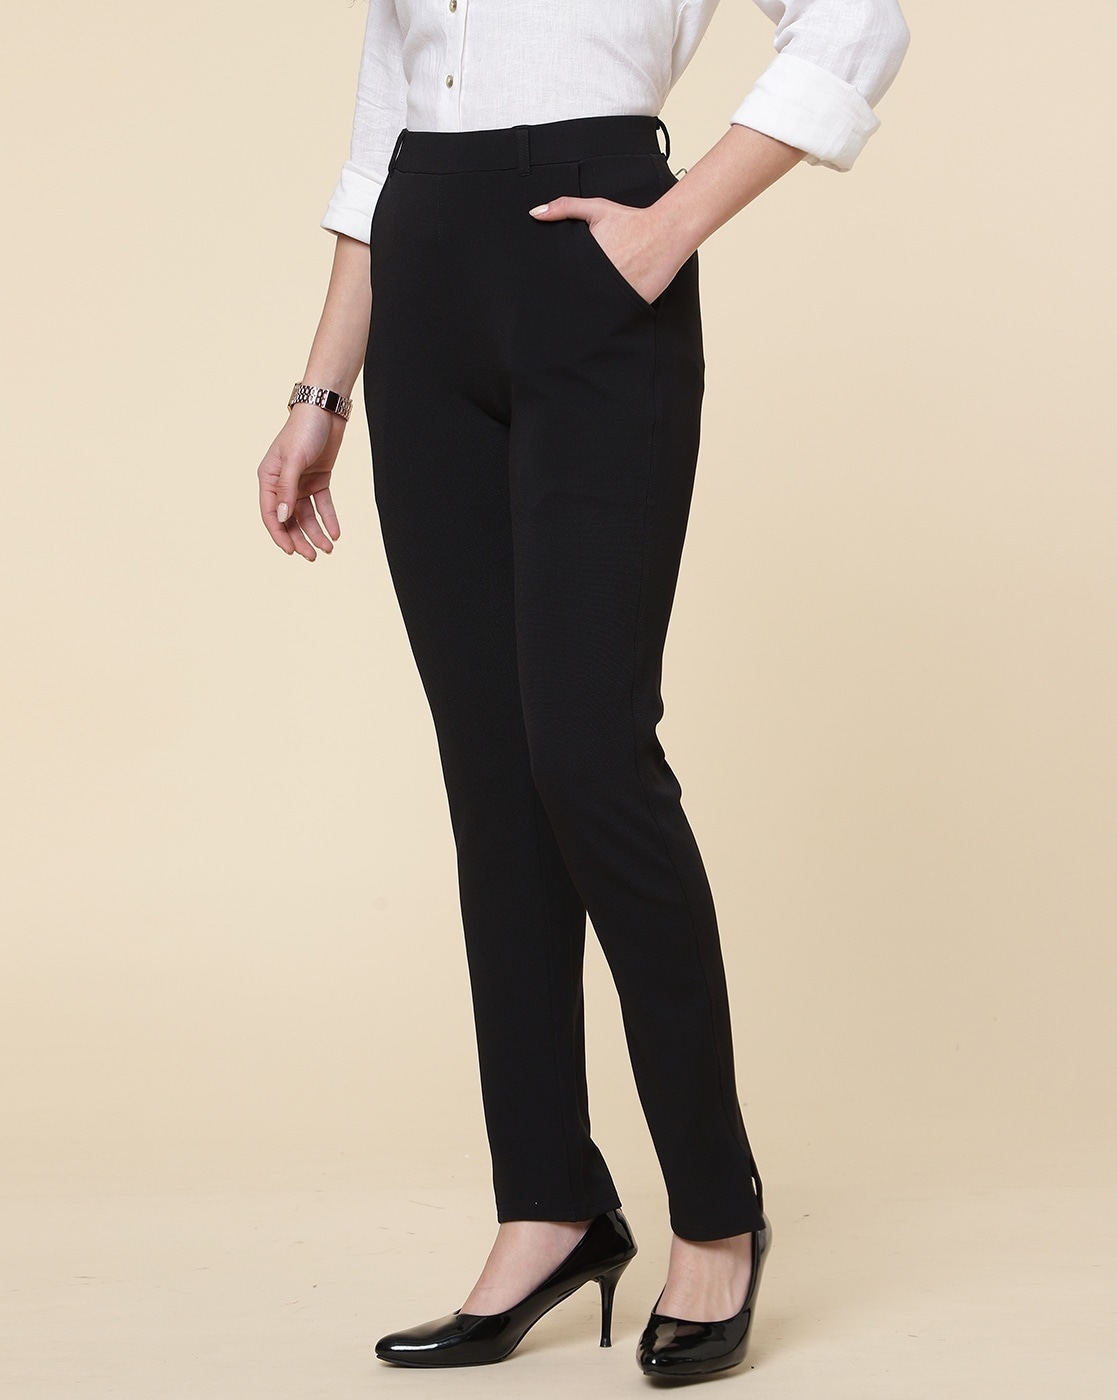 Buy LIFE Black Solid Regular Fit Rayon Women's Casual Pants | Shoppers Stop